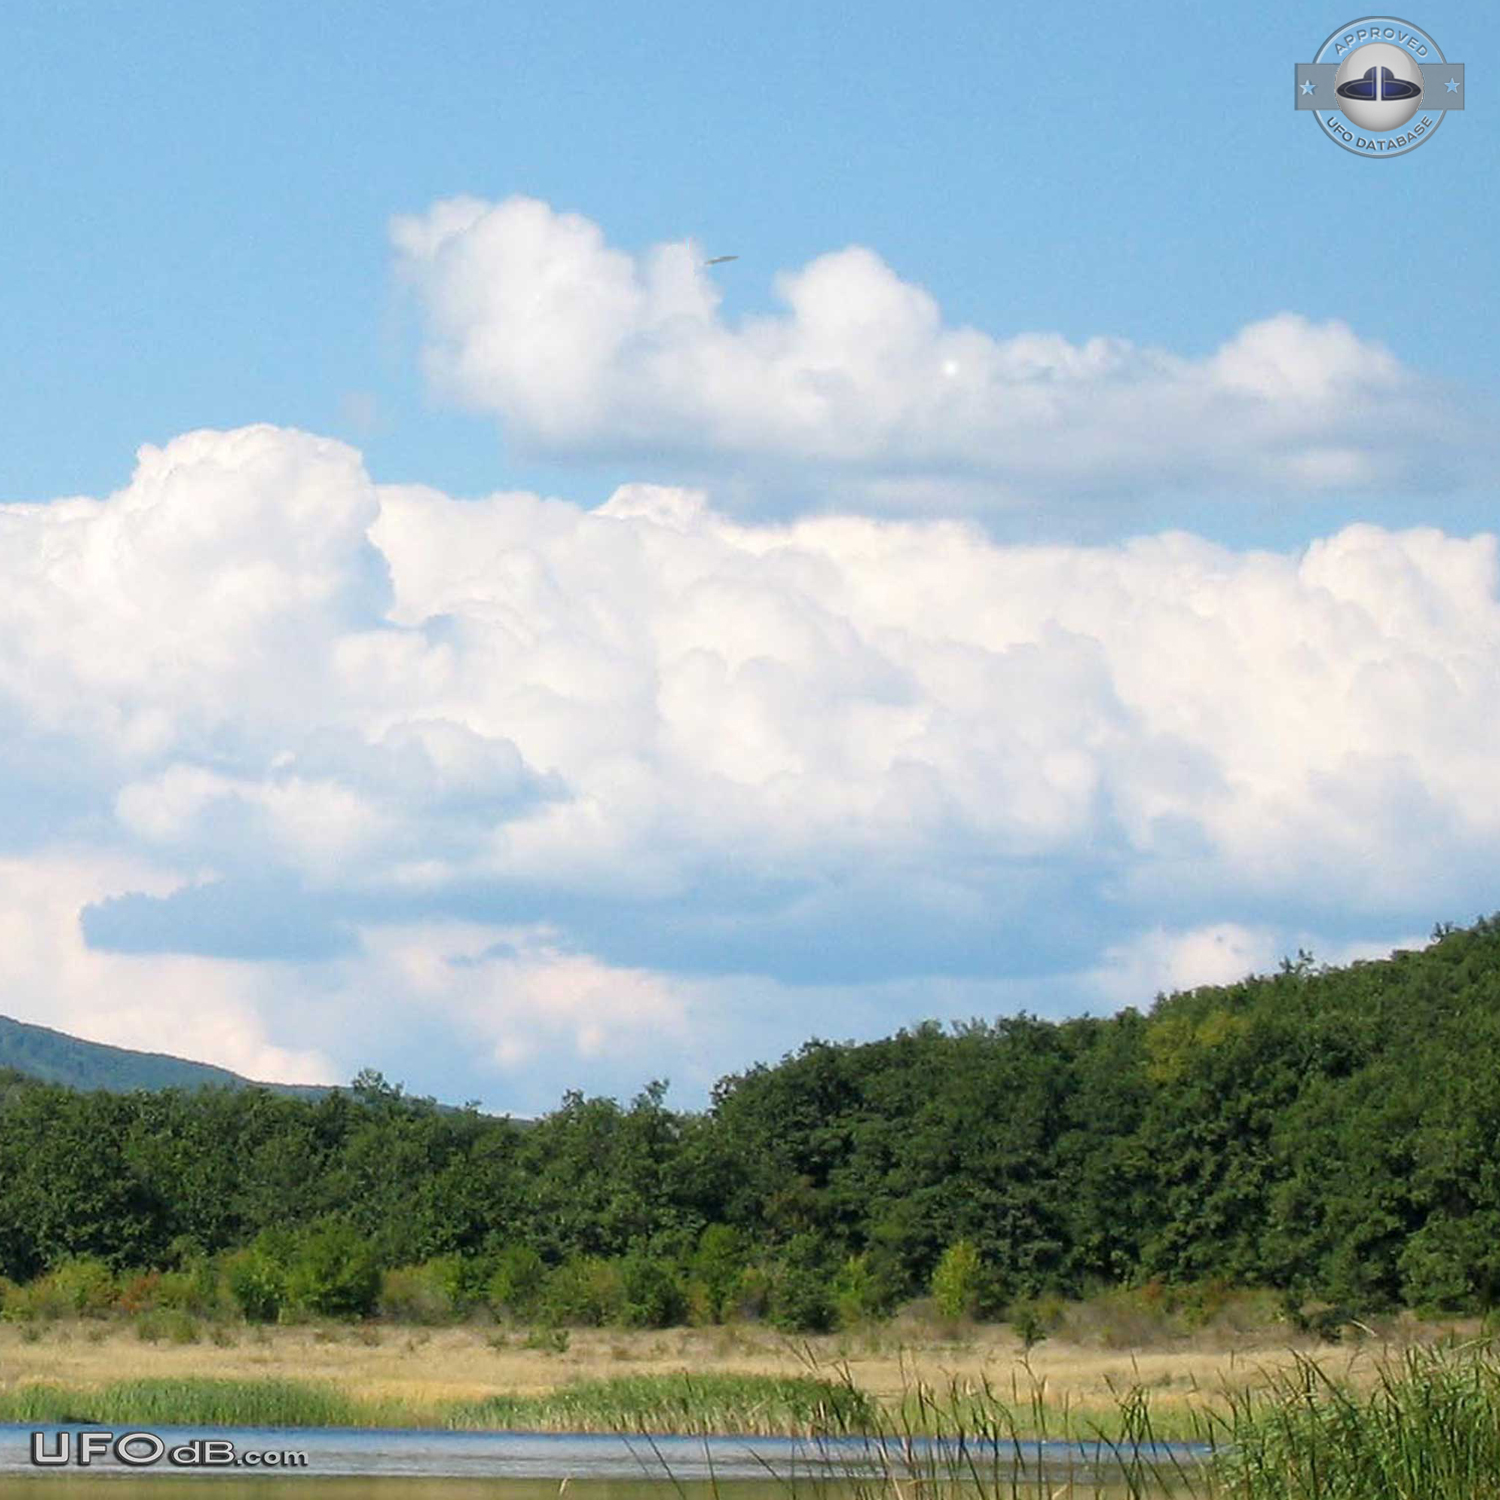 UFO in the distance over Dunoon, Scotland caught on picture in 2010 UFO Picture #398-1